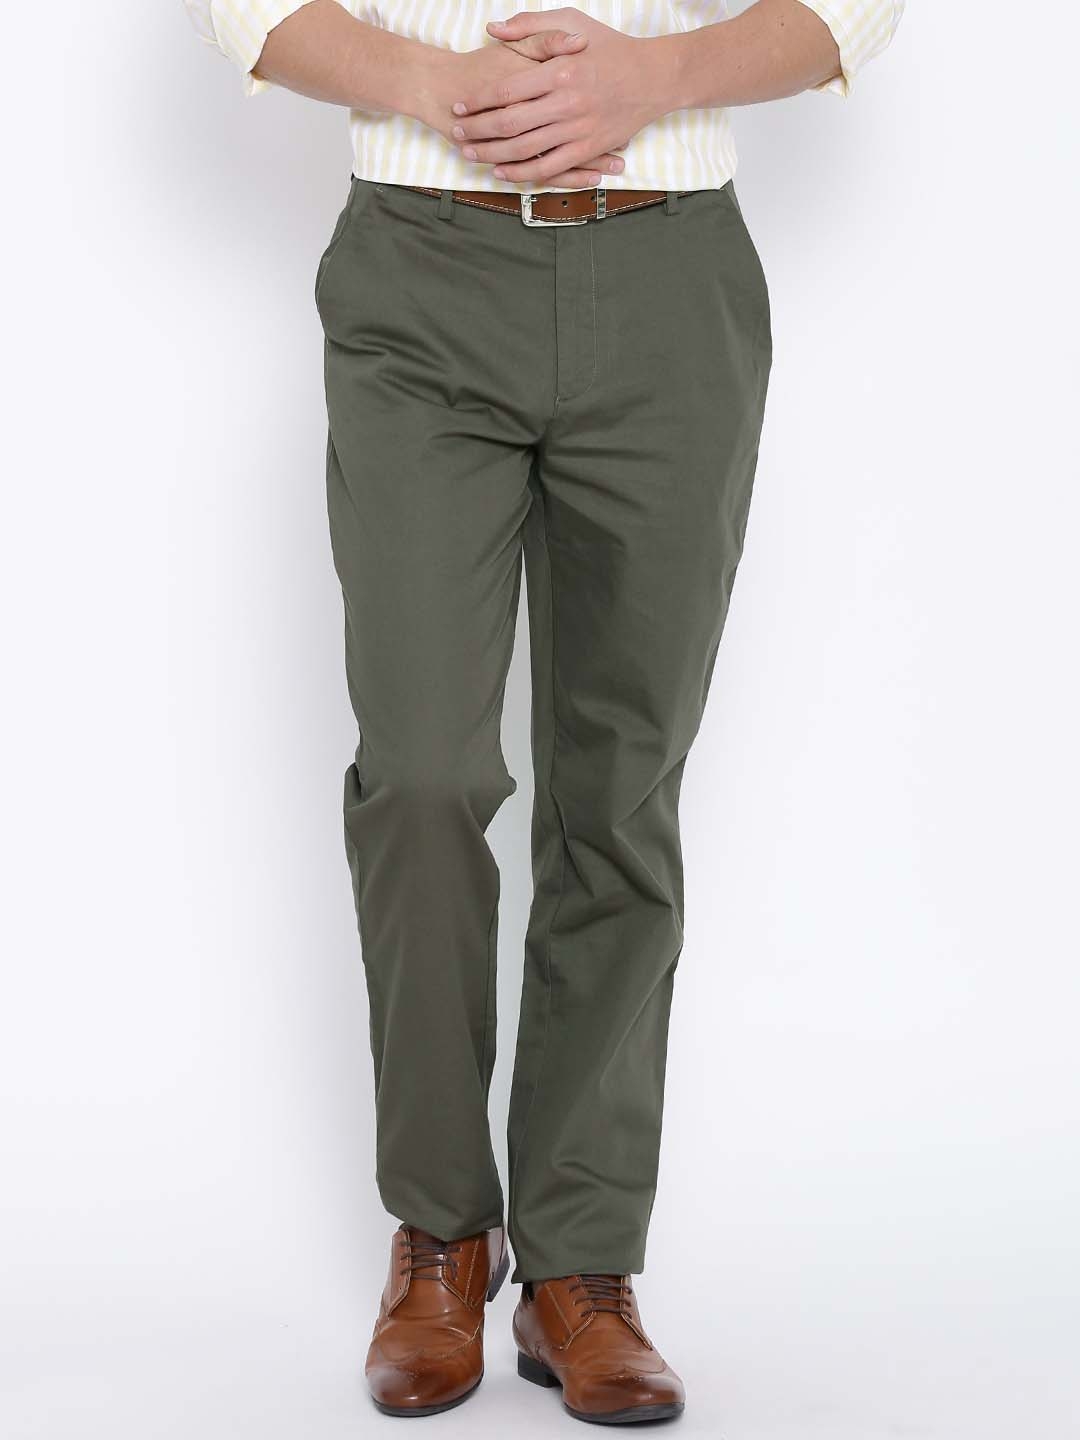 Washable Olive Green Formal Wear Mens Plain Cotton Pant at Best Price in  Tirupur | Pss Garments